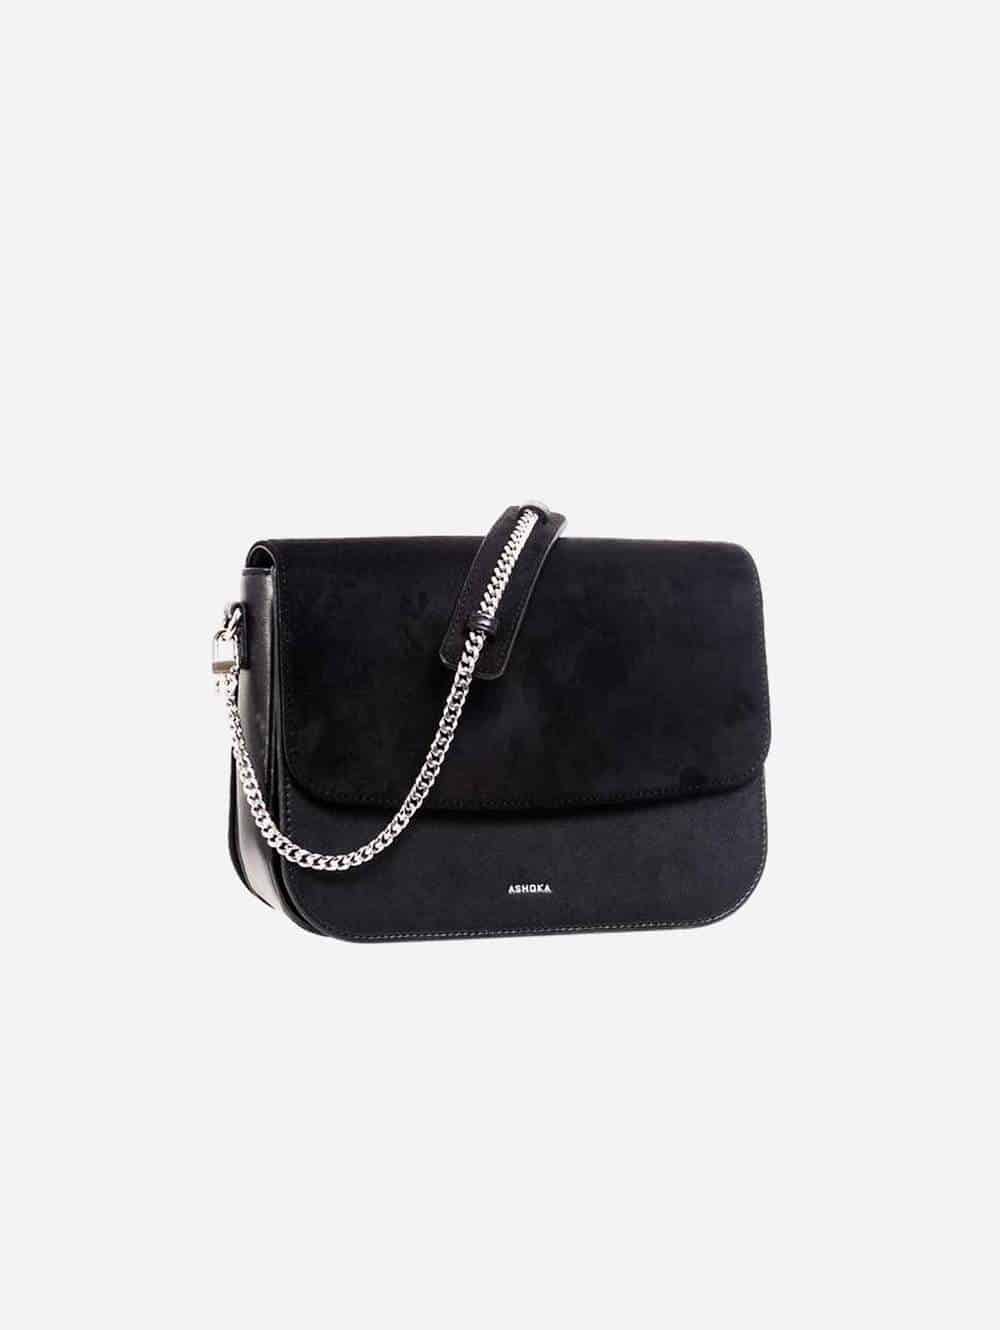 Black bag with silver and black chain link strap from Ashoka Paris